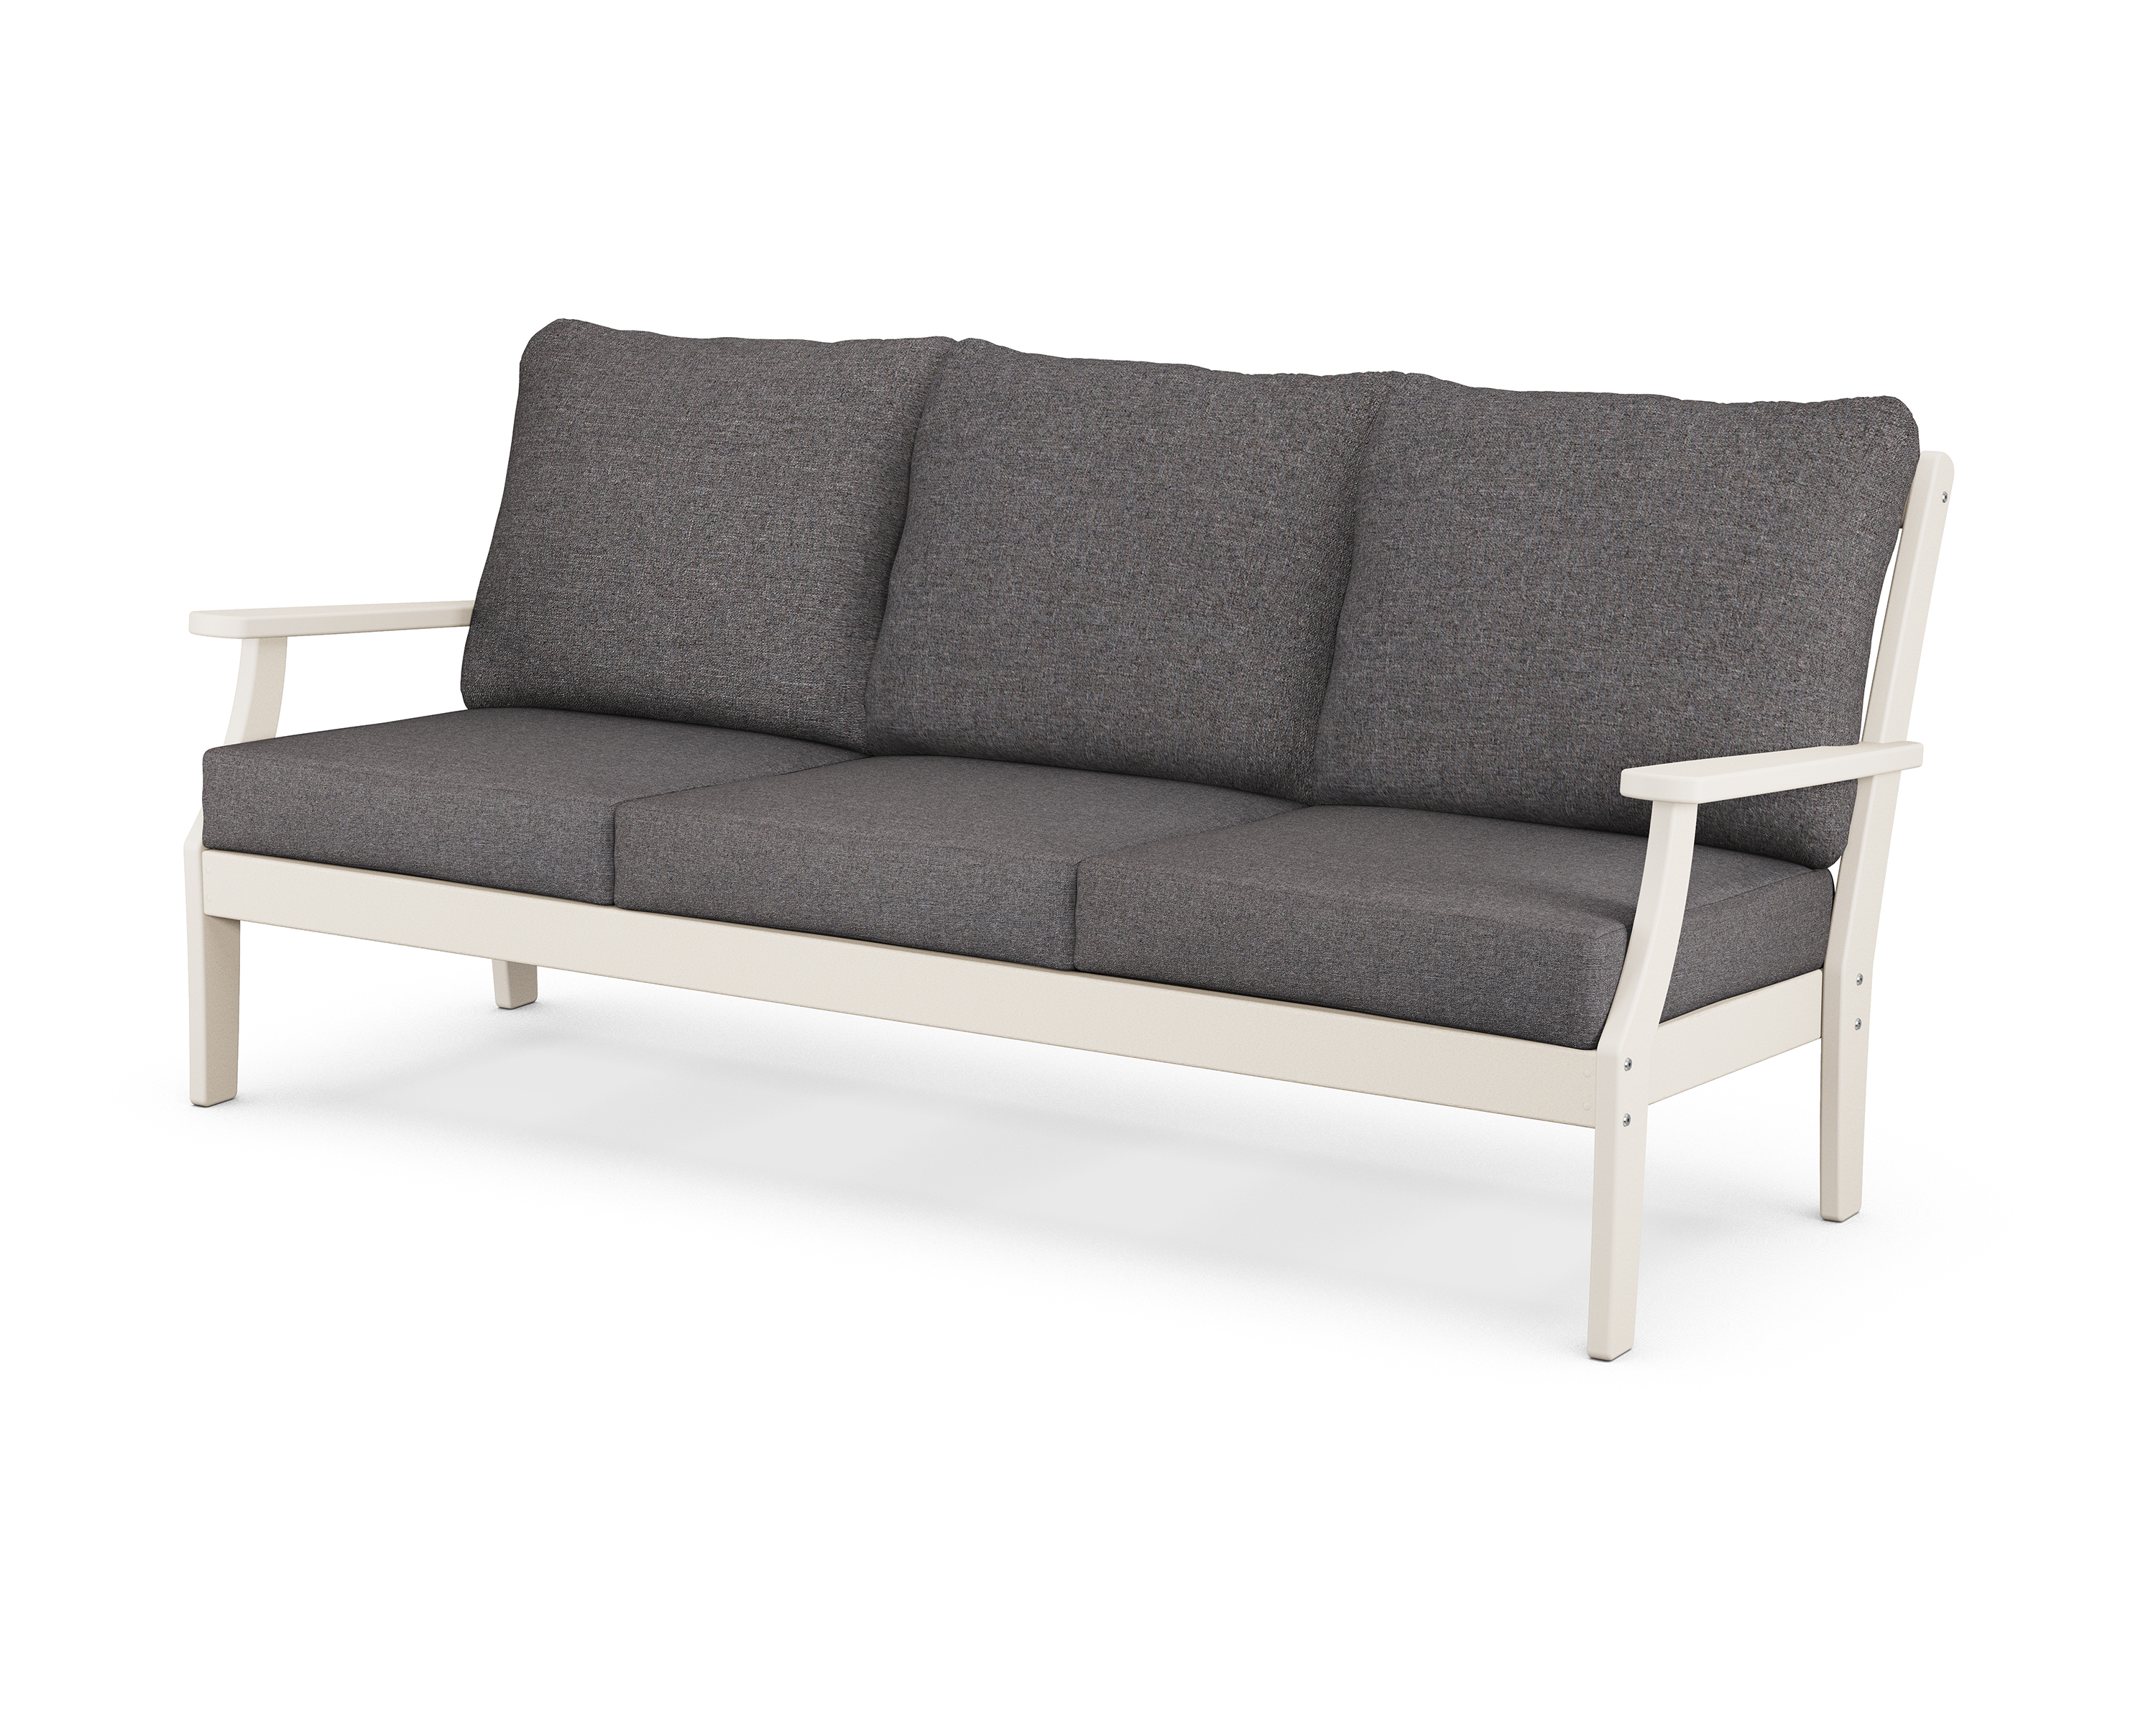 braxton deep seating sofa in sand / ash charcoal product image